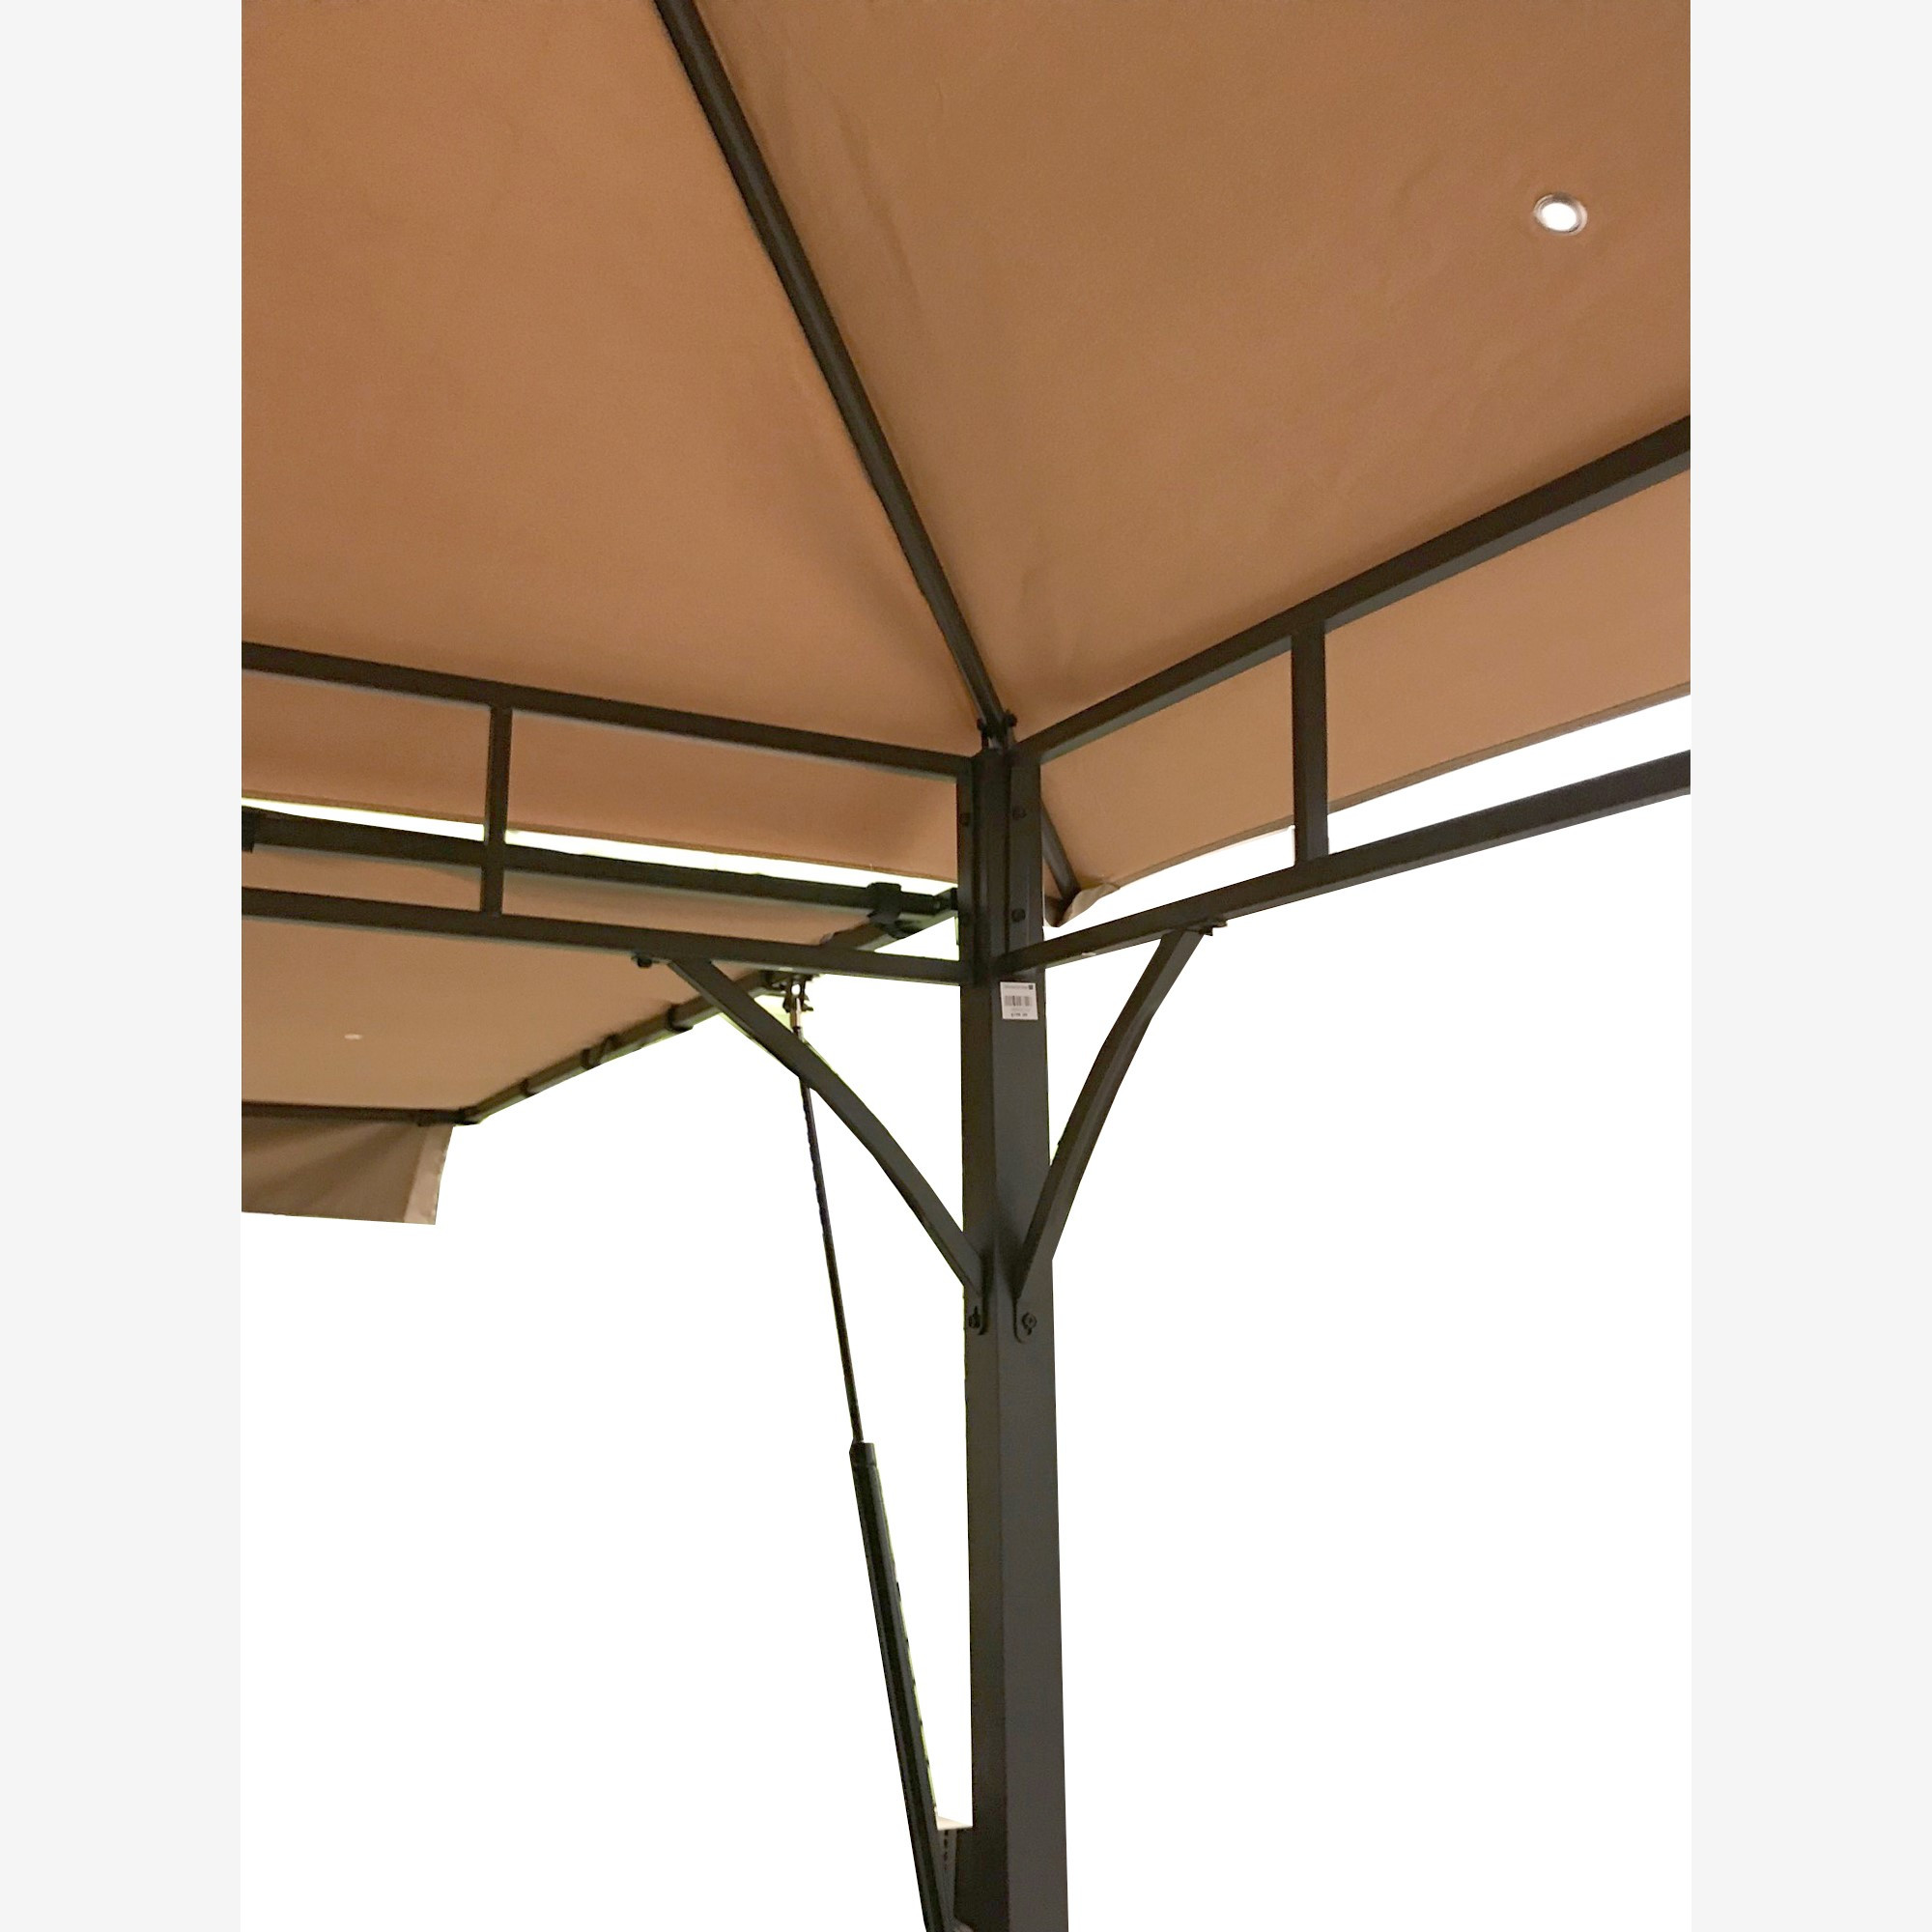 Christmas Tree Shop Awning
 Replacement Canopy and Awning Set for CTS Awning Gaz